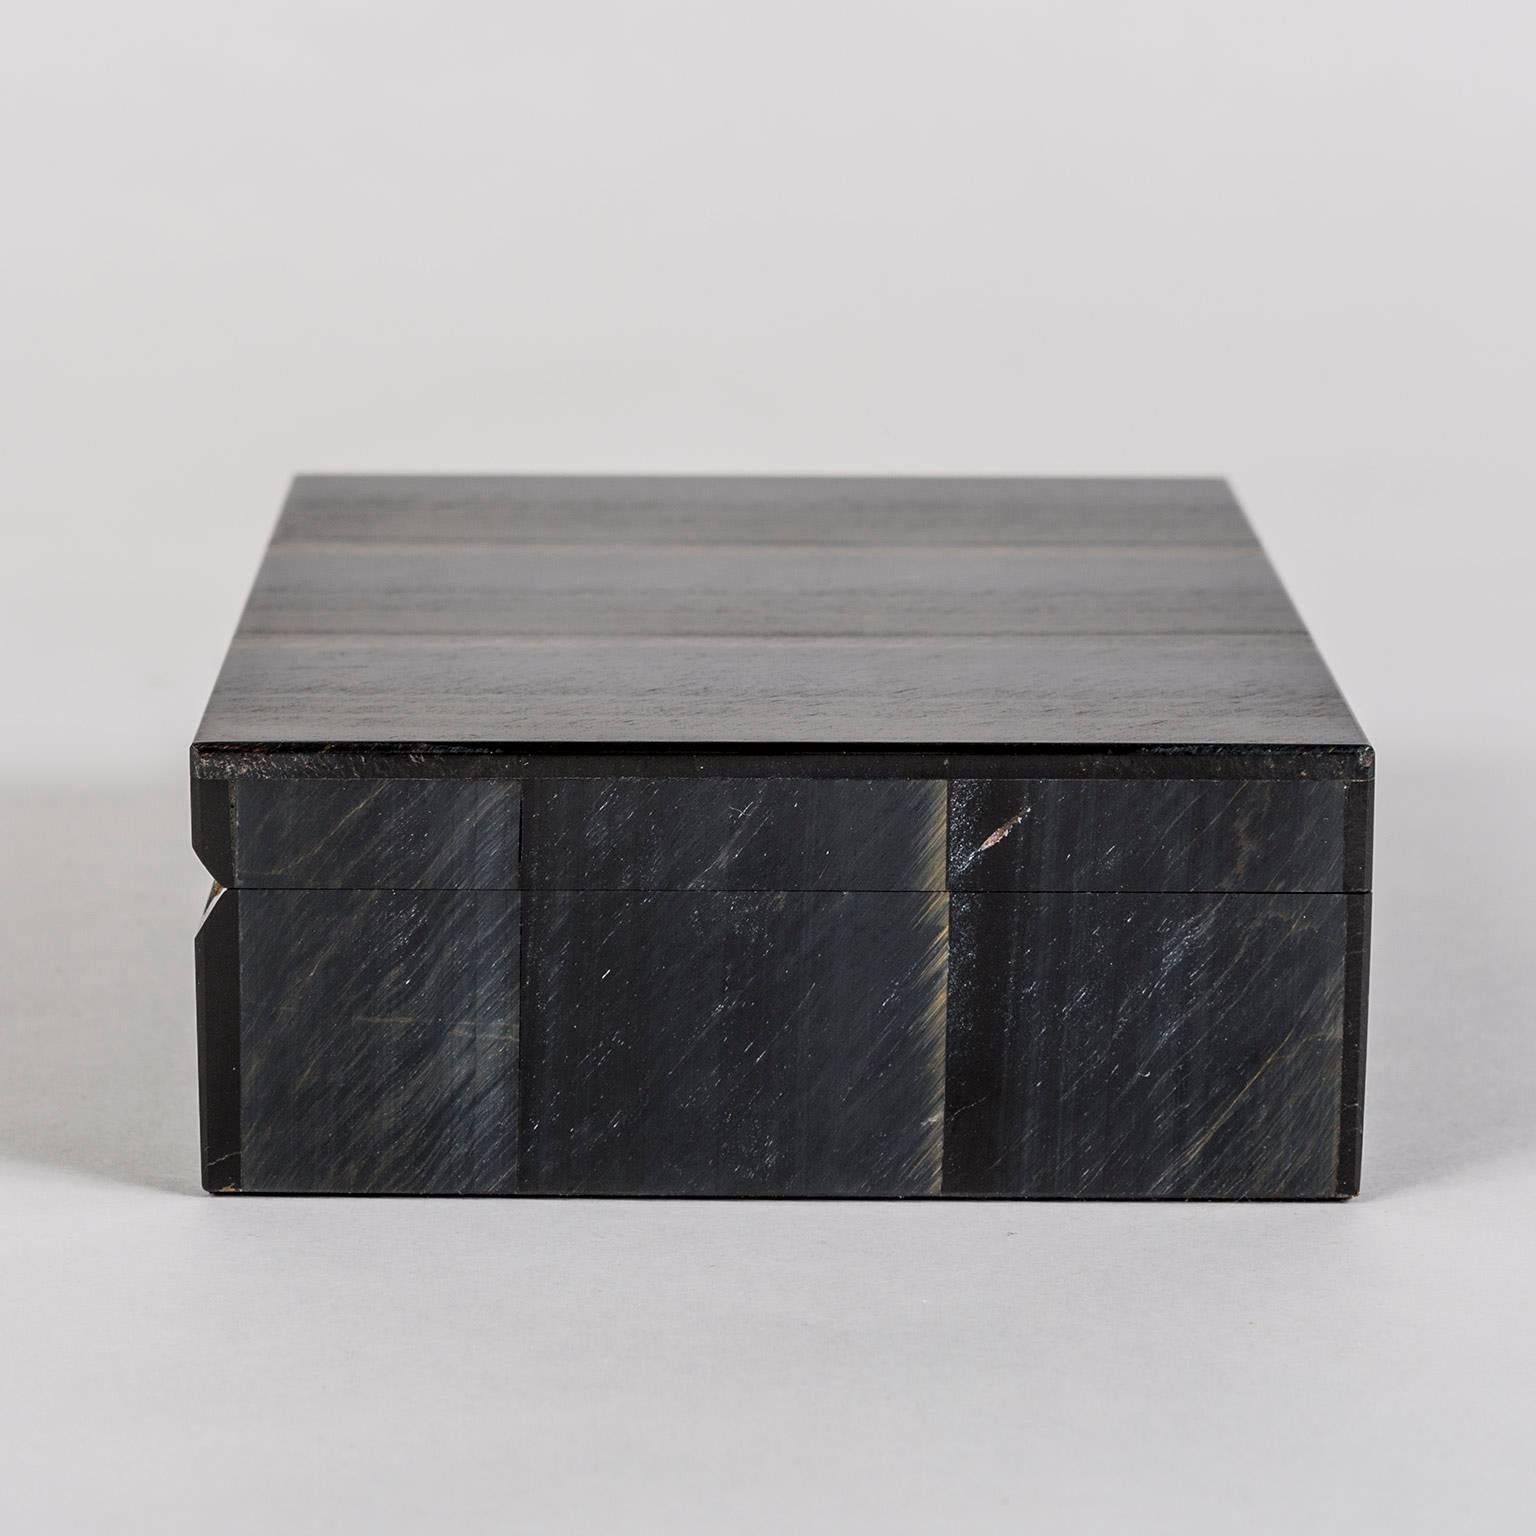 stone box with lid